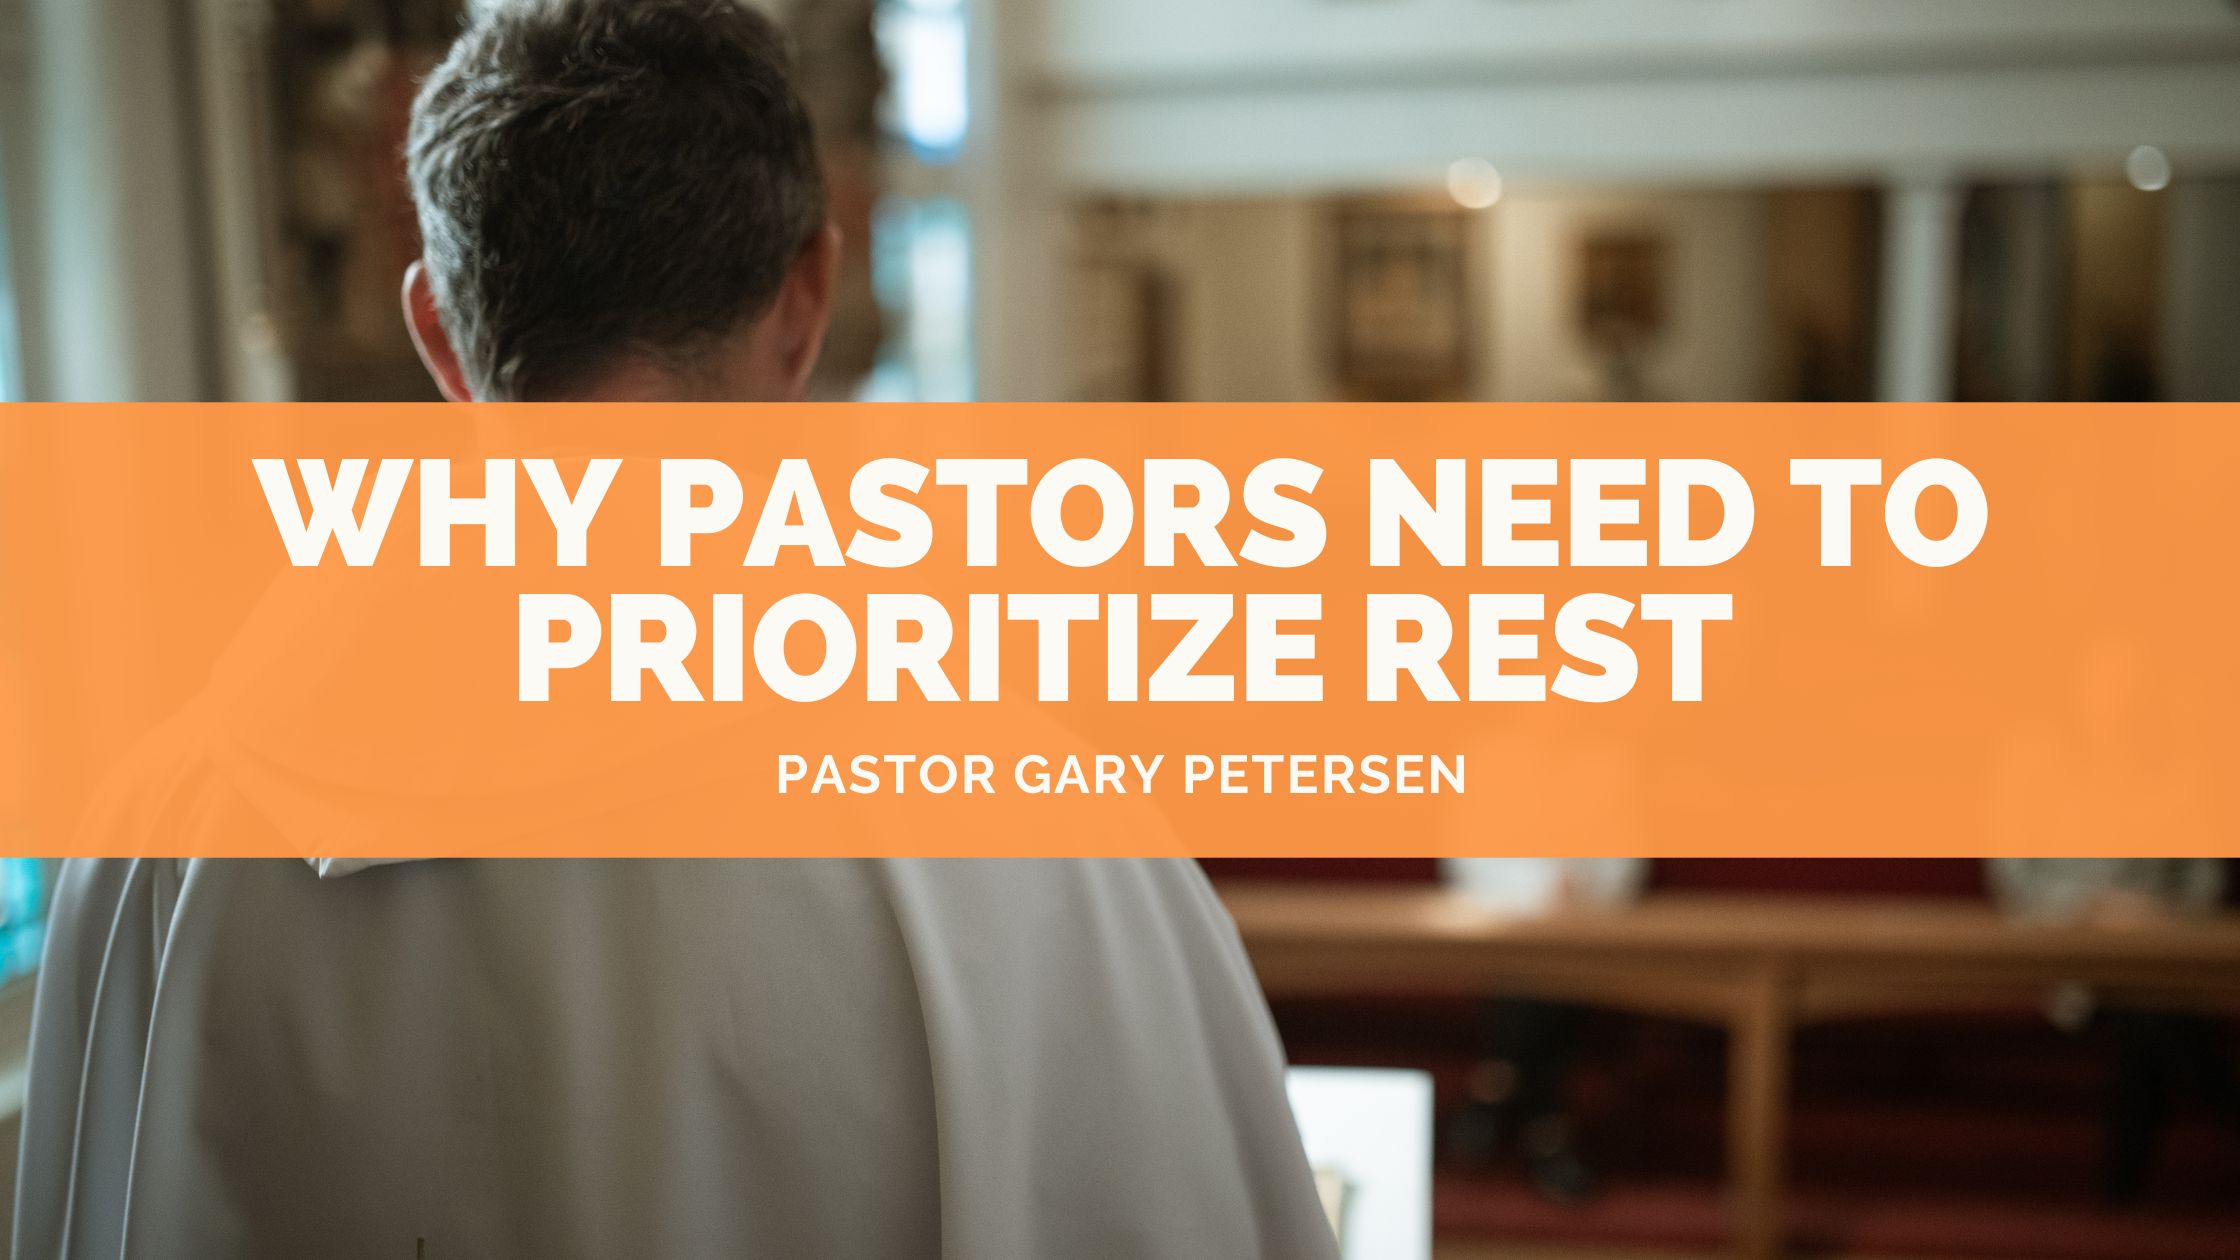 Why Pastors Need to Prioritize Rest